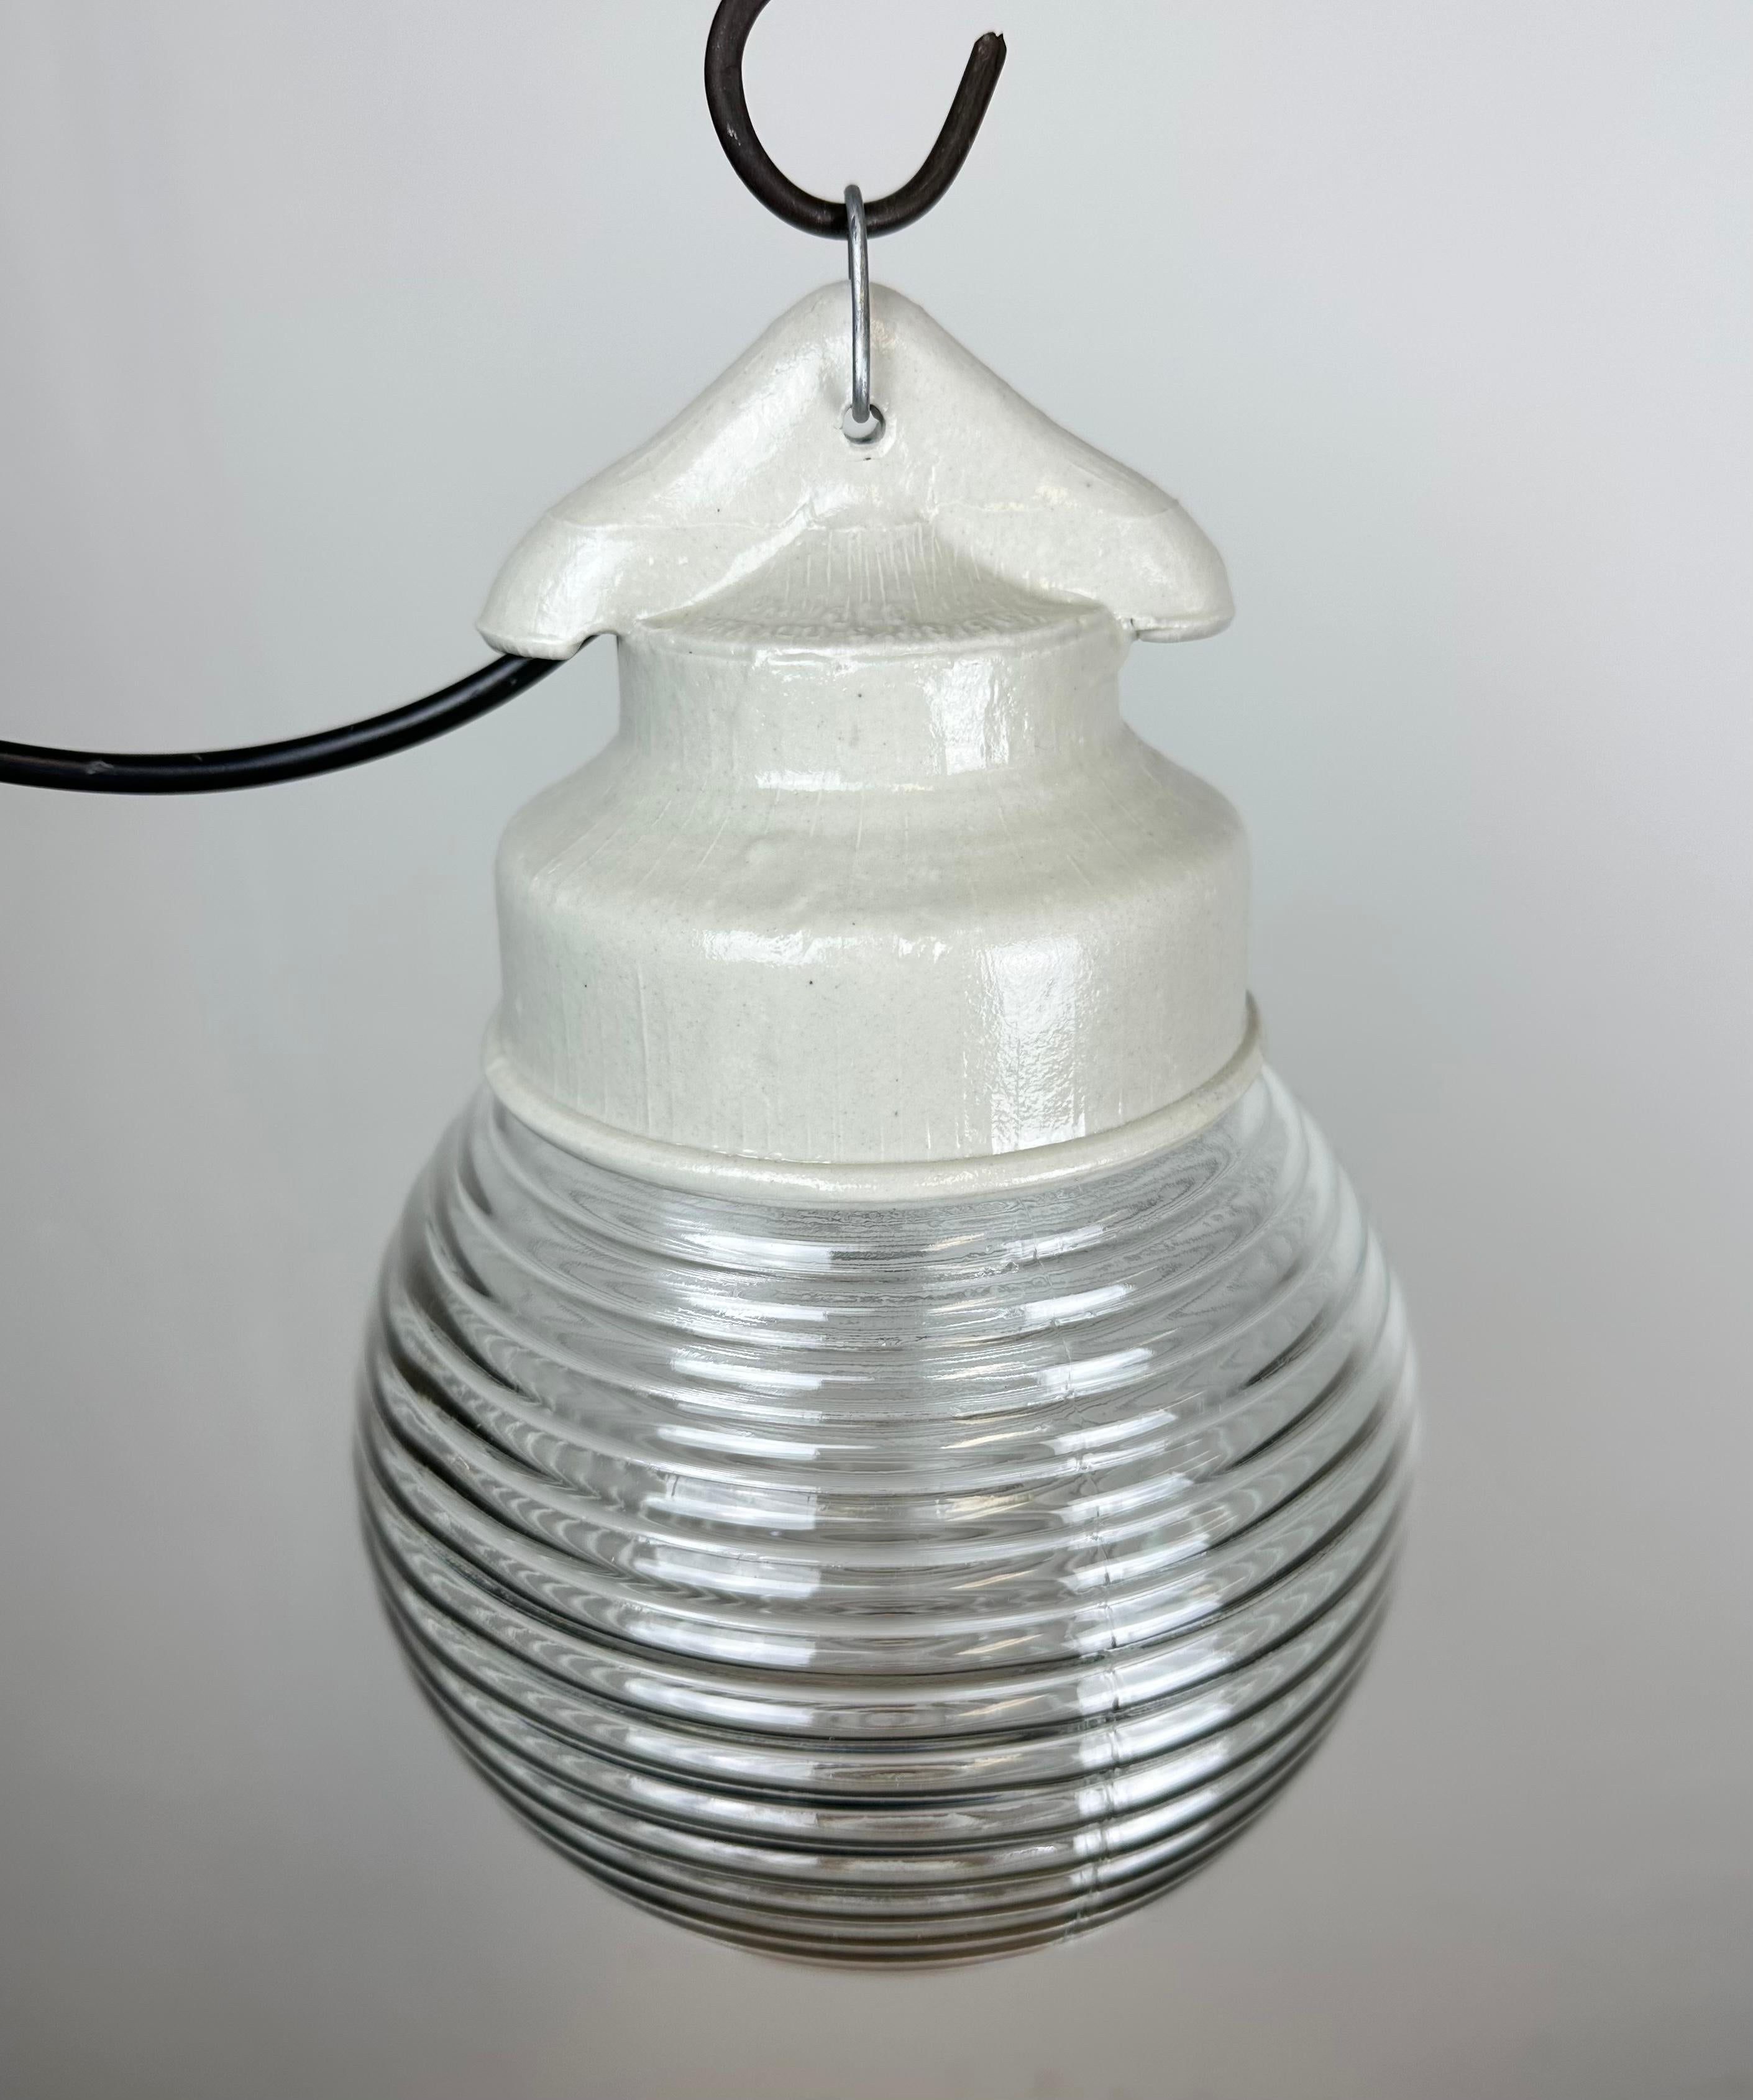 Industrial White Porcelain Pendant Light with Ribbed Glass, 1970s For Sale 2